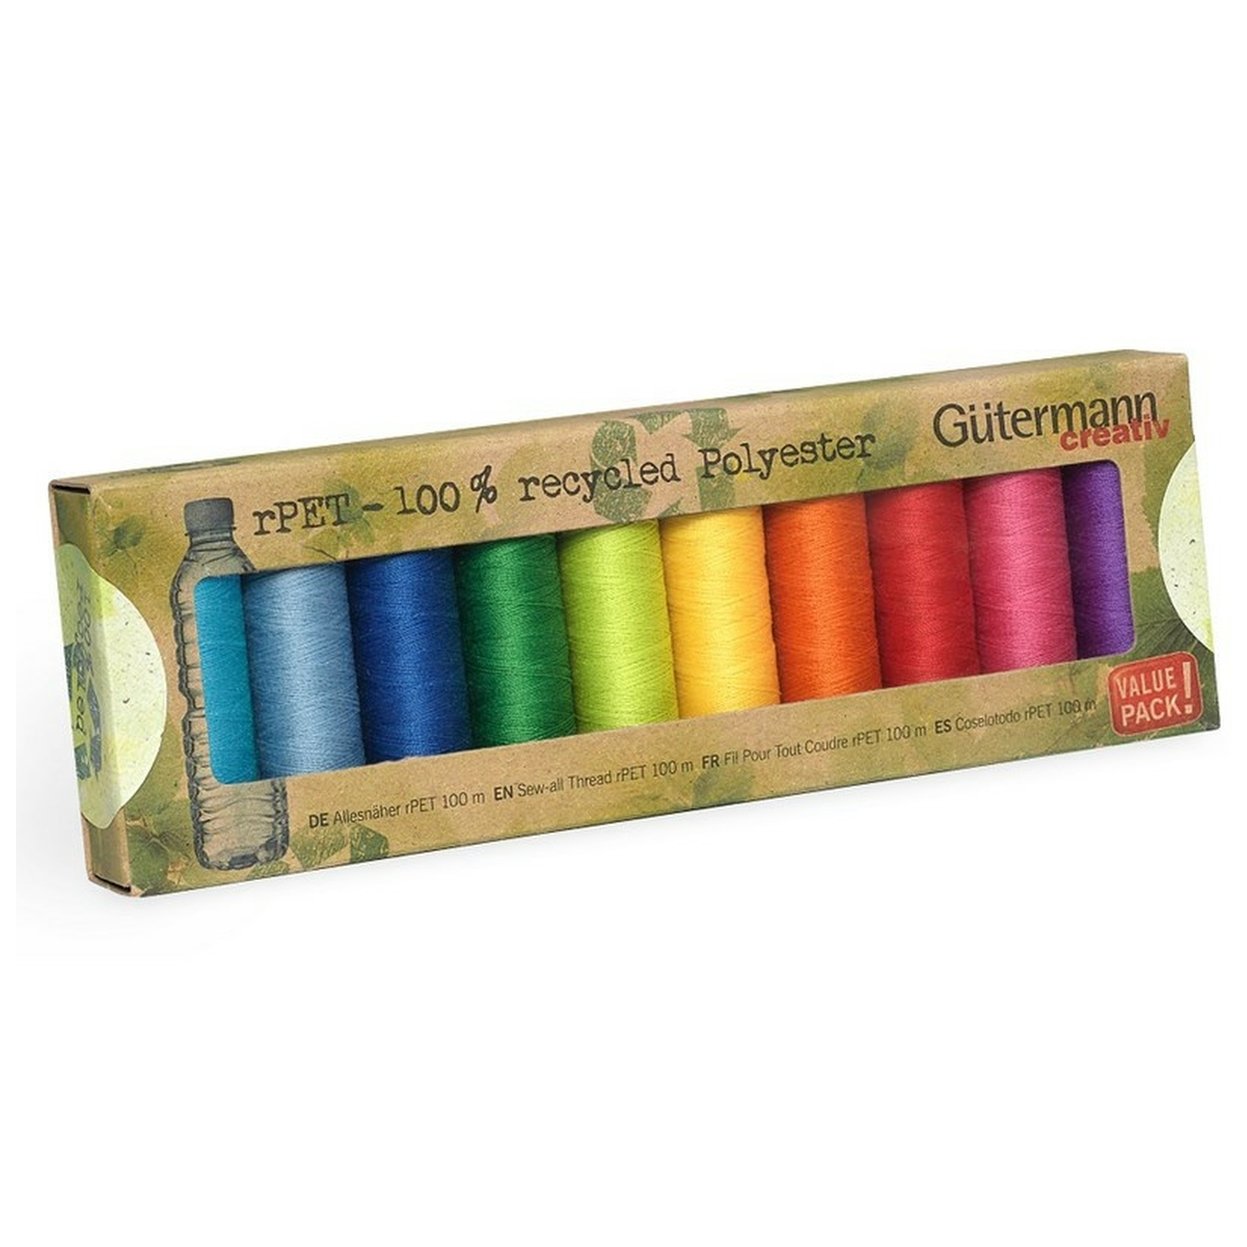 Gutermann Recycled Thread Mid Range Set, 10 reels from Jaycotts Sewing Supplies